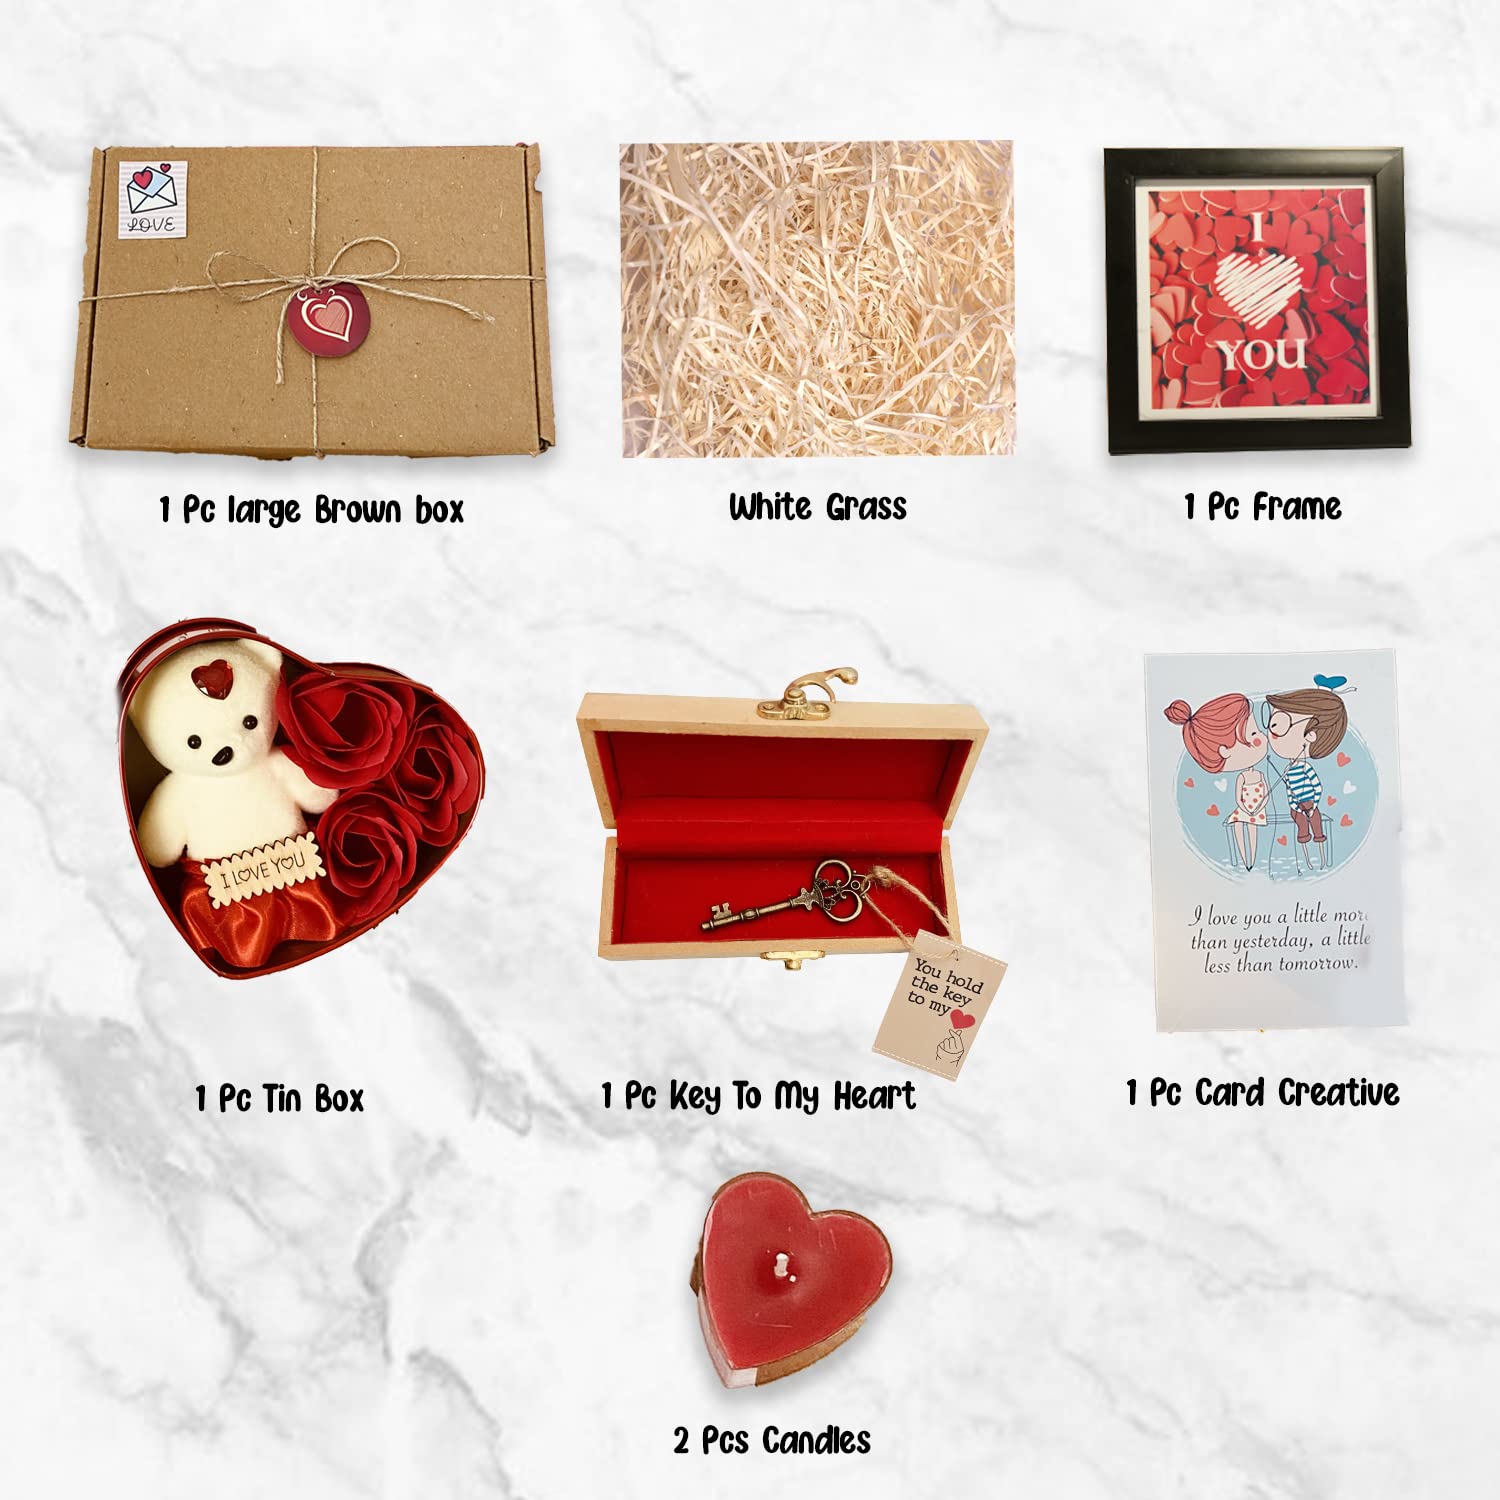 The 25 Best Valentines Day Gifts for Any Budget  Billboard